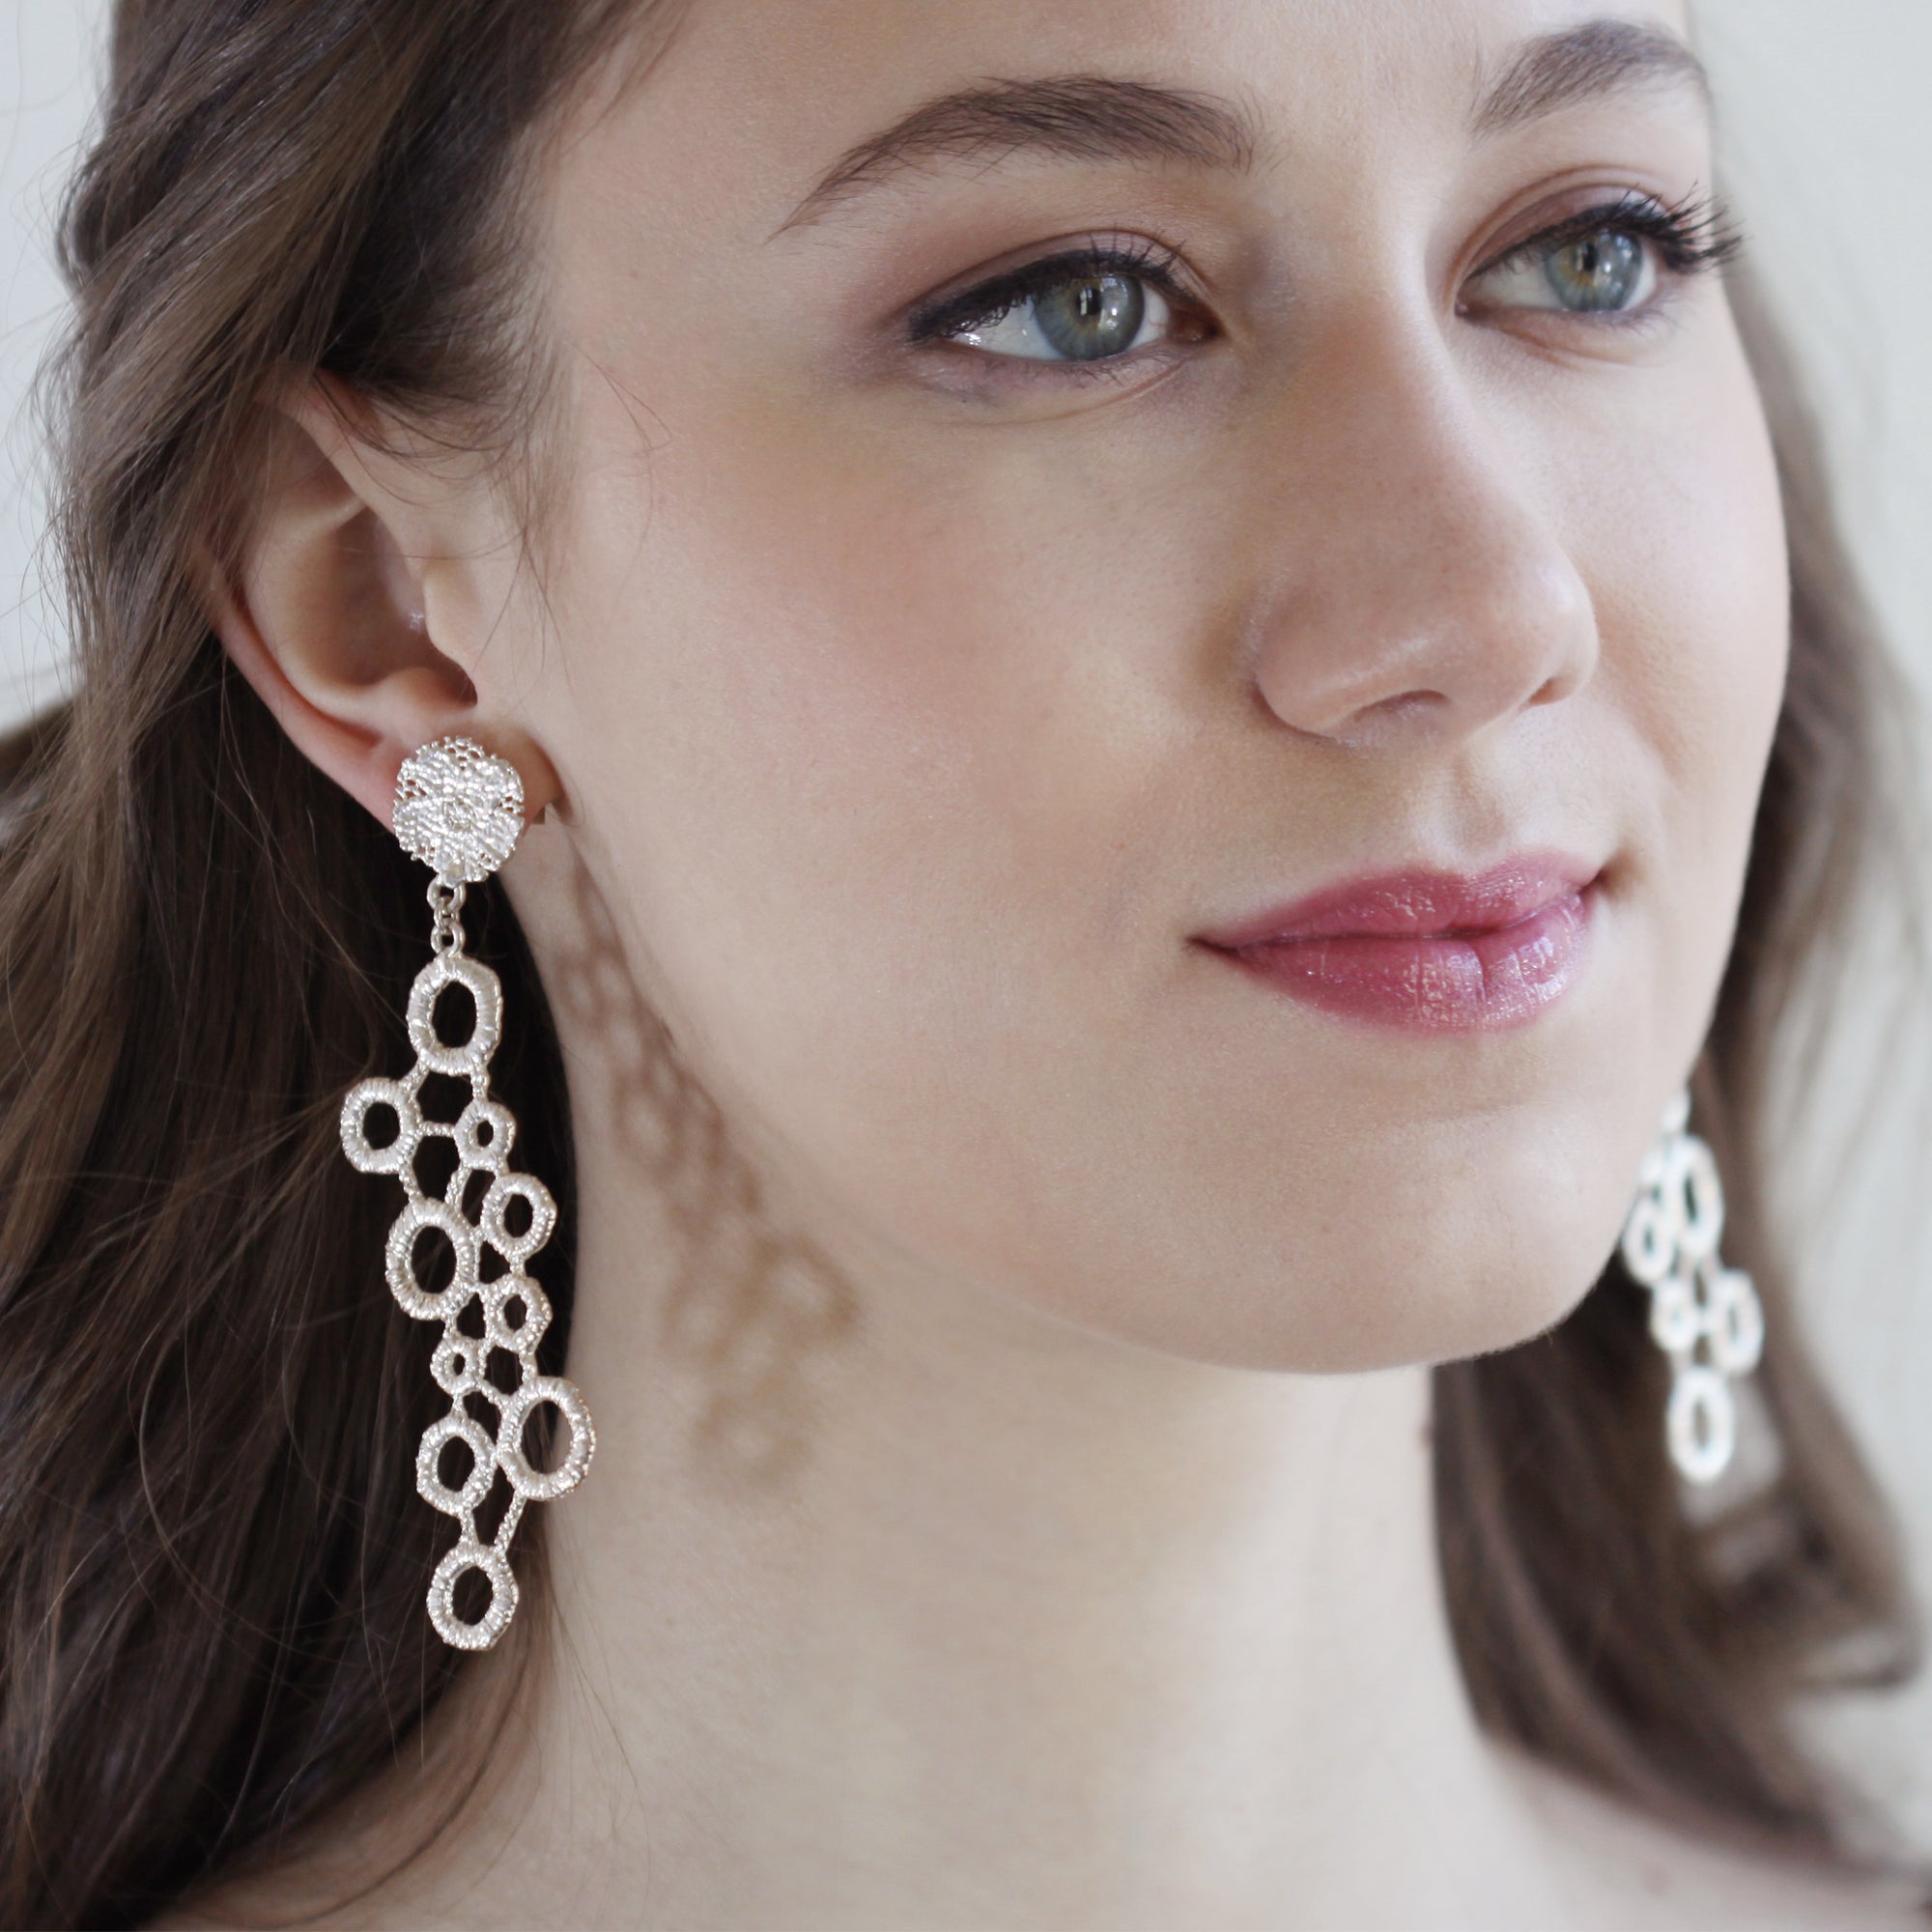 Large drop earrings made from circular lace dipped in sterling silver.